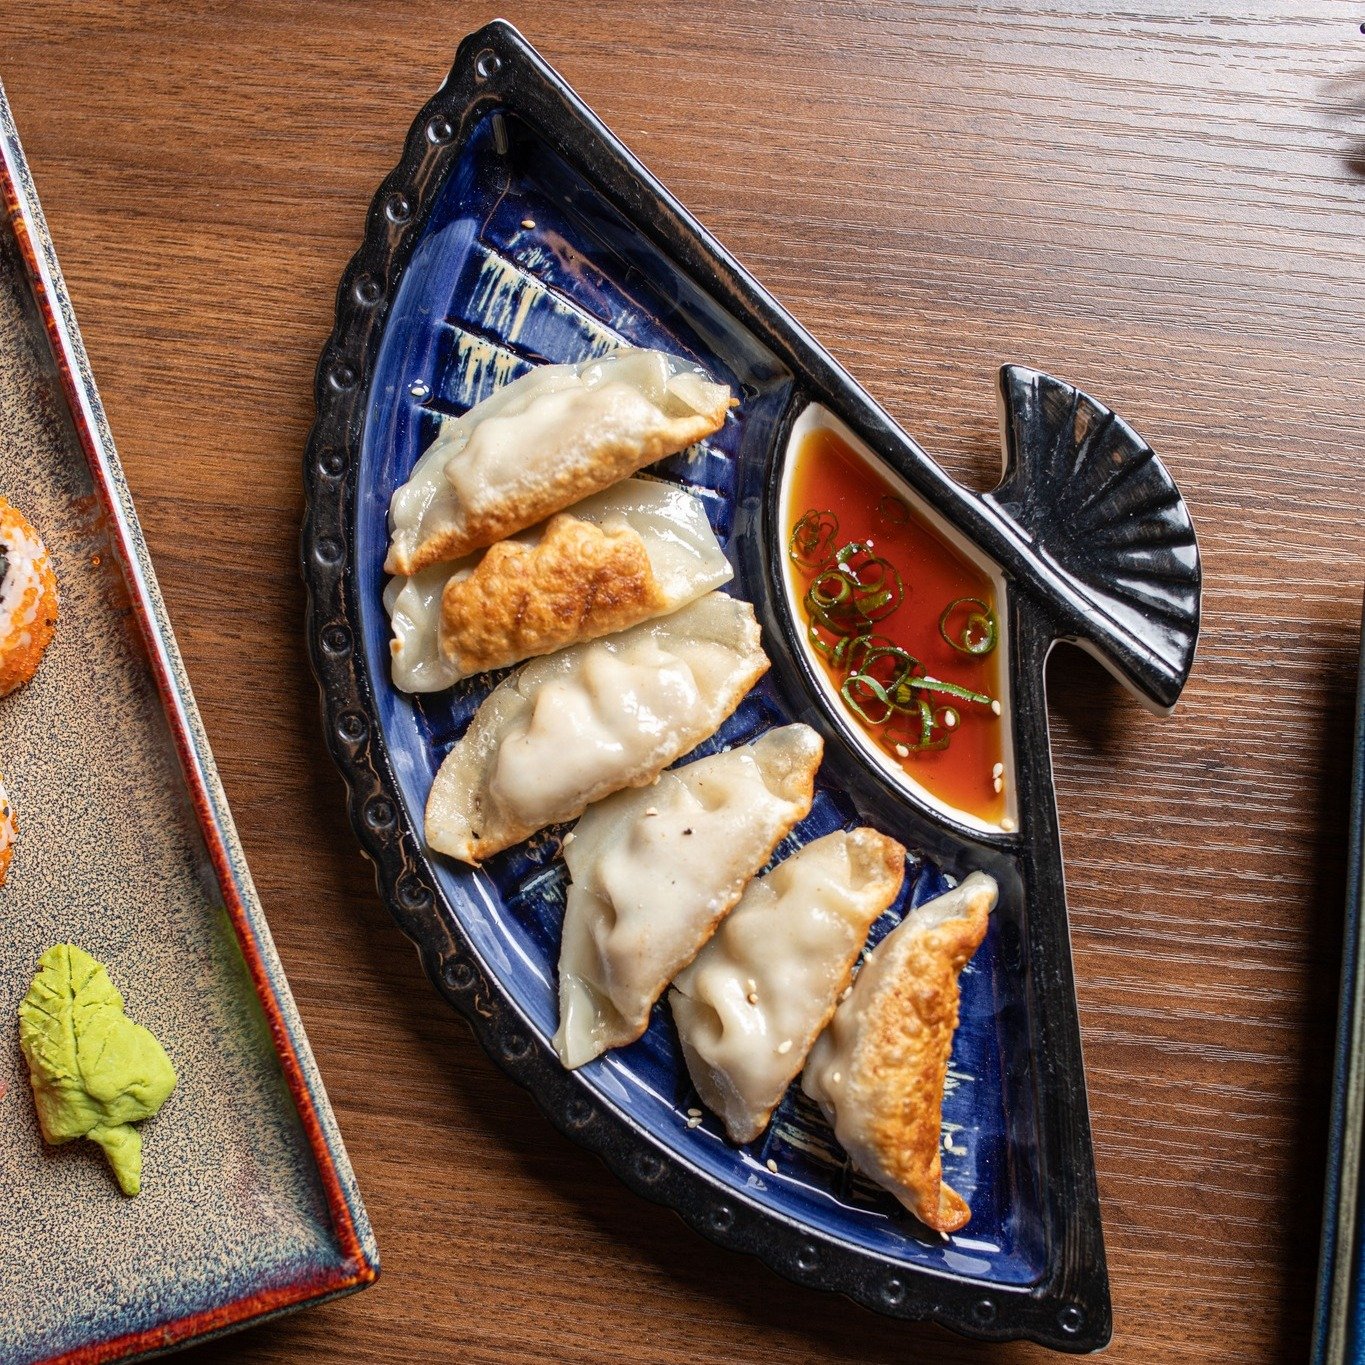 Satisfy your cravings with our Pan-Fried Chicken Gyoza! 

Indulge in 6 mouthwatering pieces filled with flavourful chicken, mushroom, and dipped in tangy ponzu sauce.

#ChopChop #Canberra #Restaurant